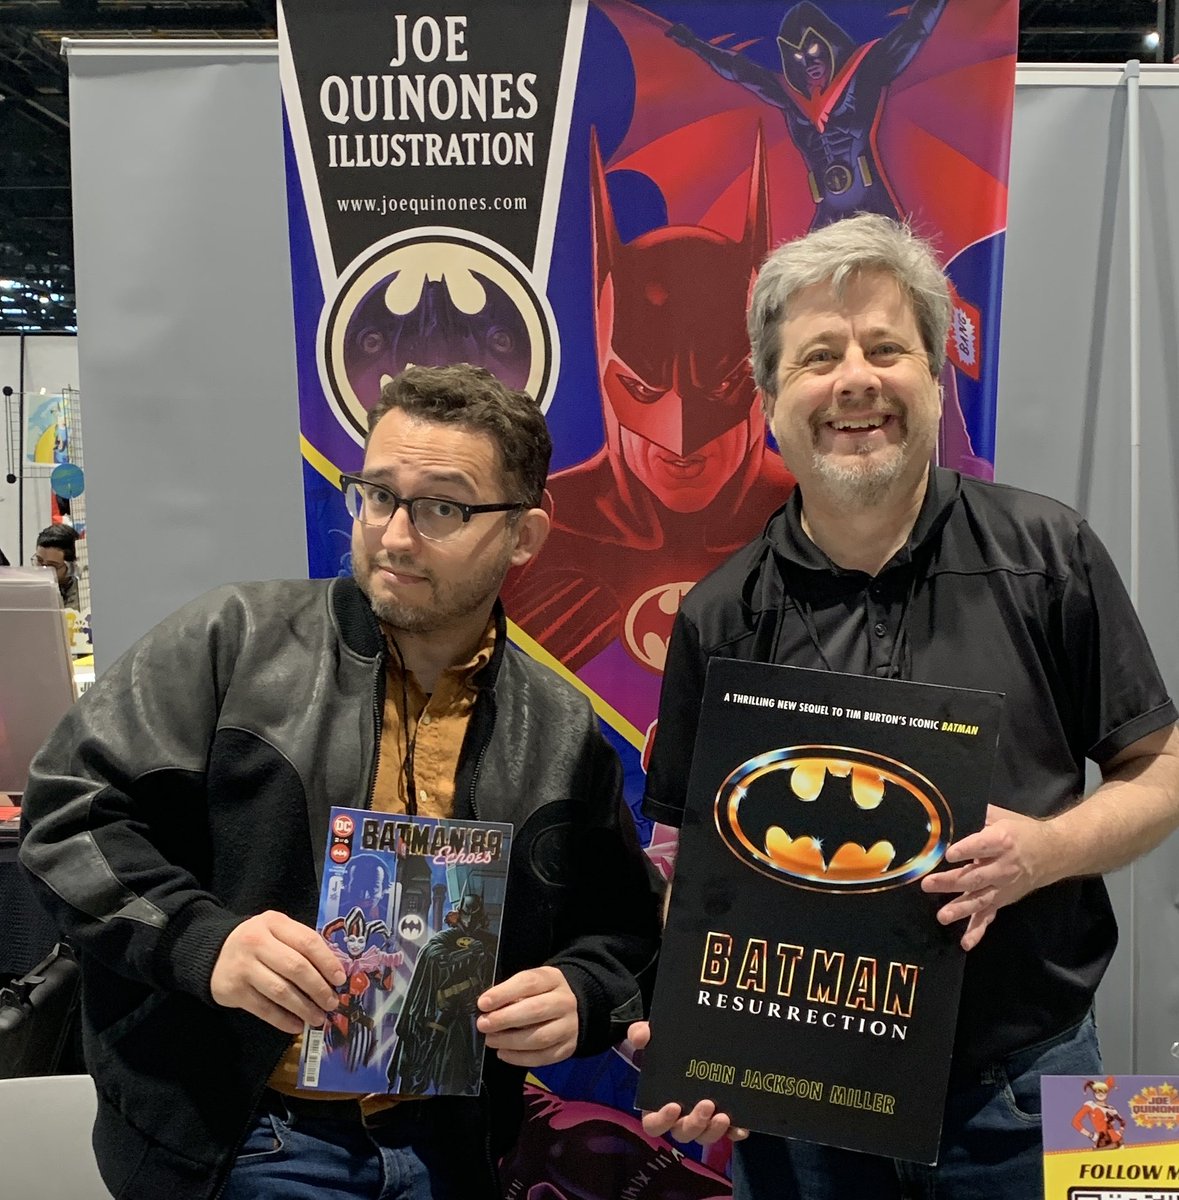 Dynamic duo time! My fellow Keaton Batman chronicler ⁦@Joe_Quinones⁩ is also at @C2E2 — L12 in artist’s alley. Joe’s the artist on the wonderful BATMAN ‘89: ECHOES, now on sale from ⁦@DCOfficial⁩. My BATMAN: RESURRECTION is out from Random House Worlds on October 15!